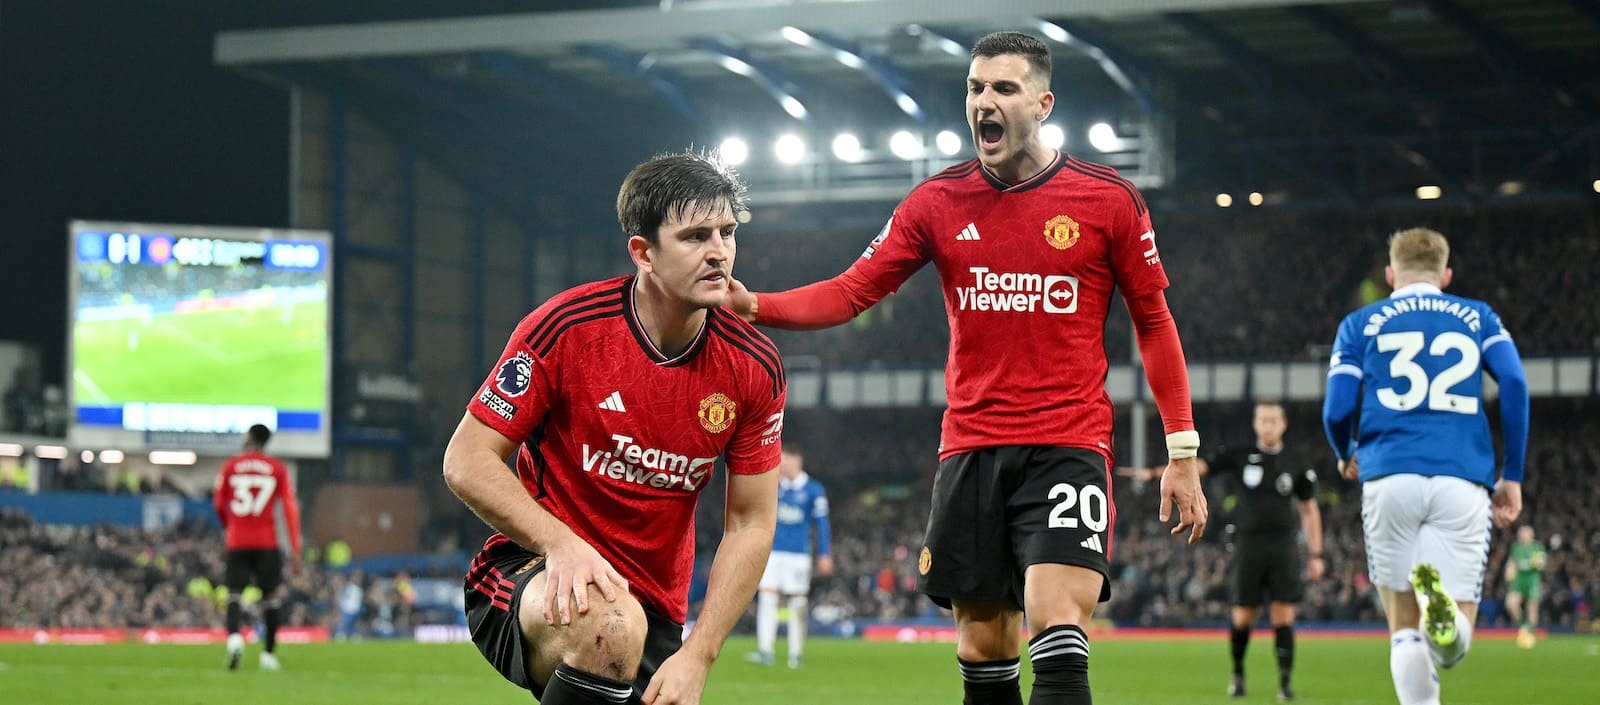 Harry Maguire wins Premier League Player of the Month award for November – Man United News And Transfer News